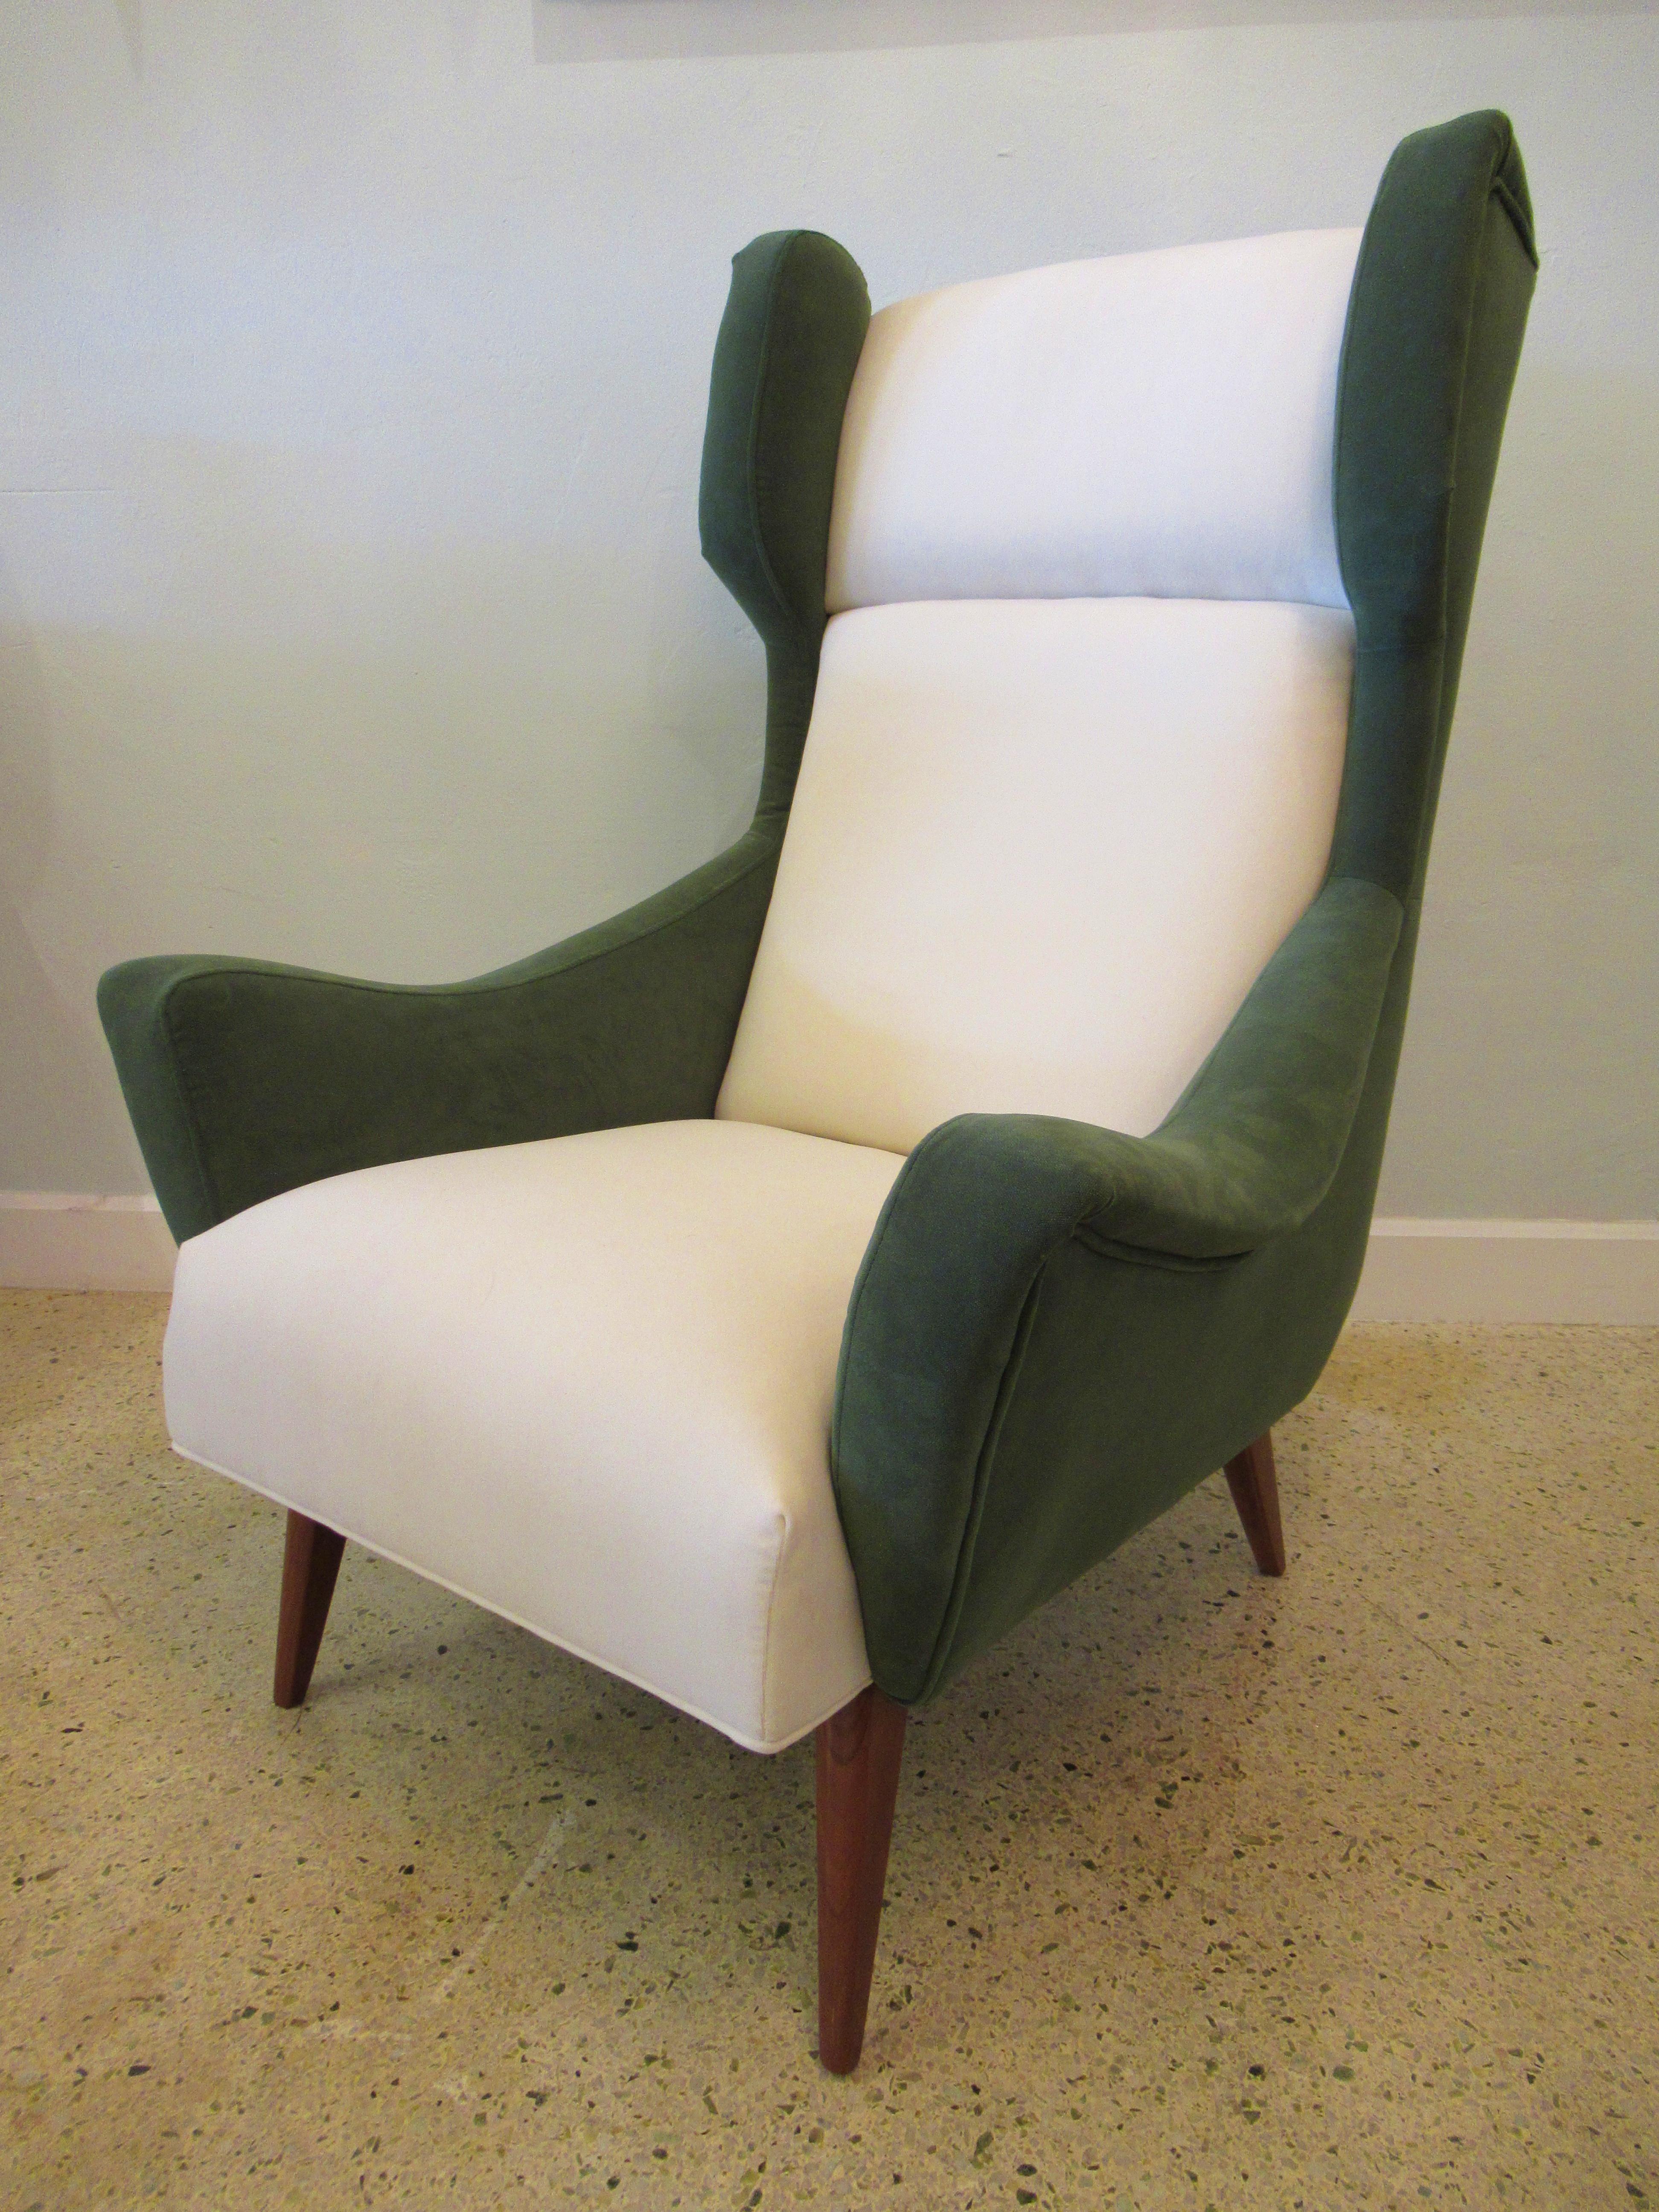 Gio Ponti wing chair from the Parco di Principe Hotel.